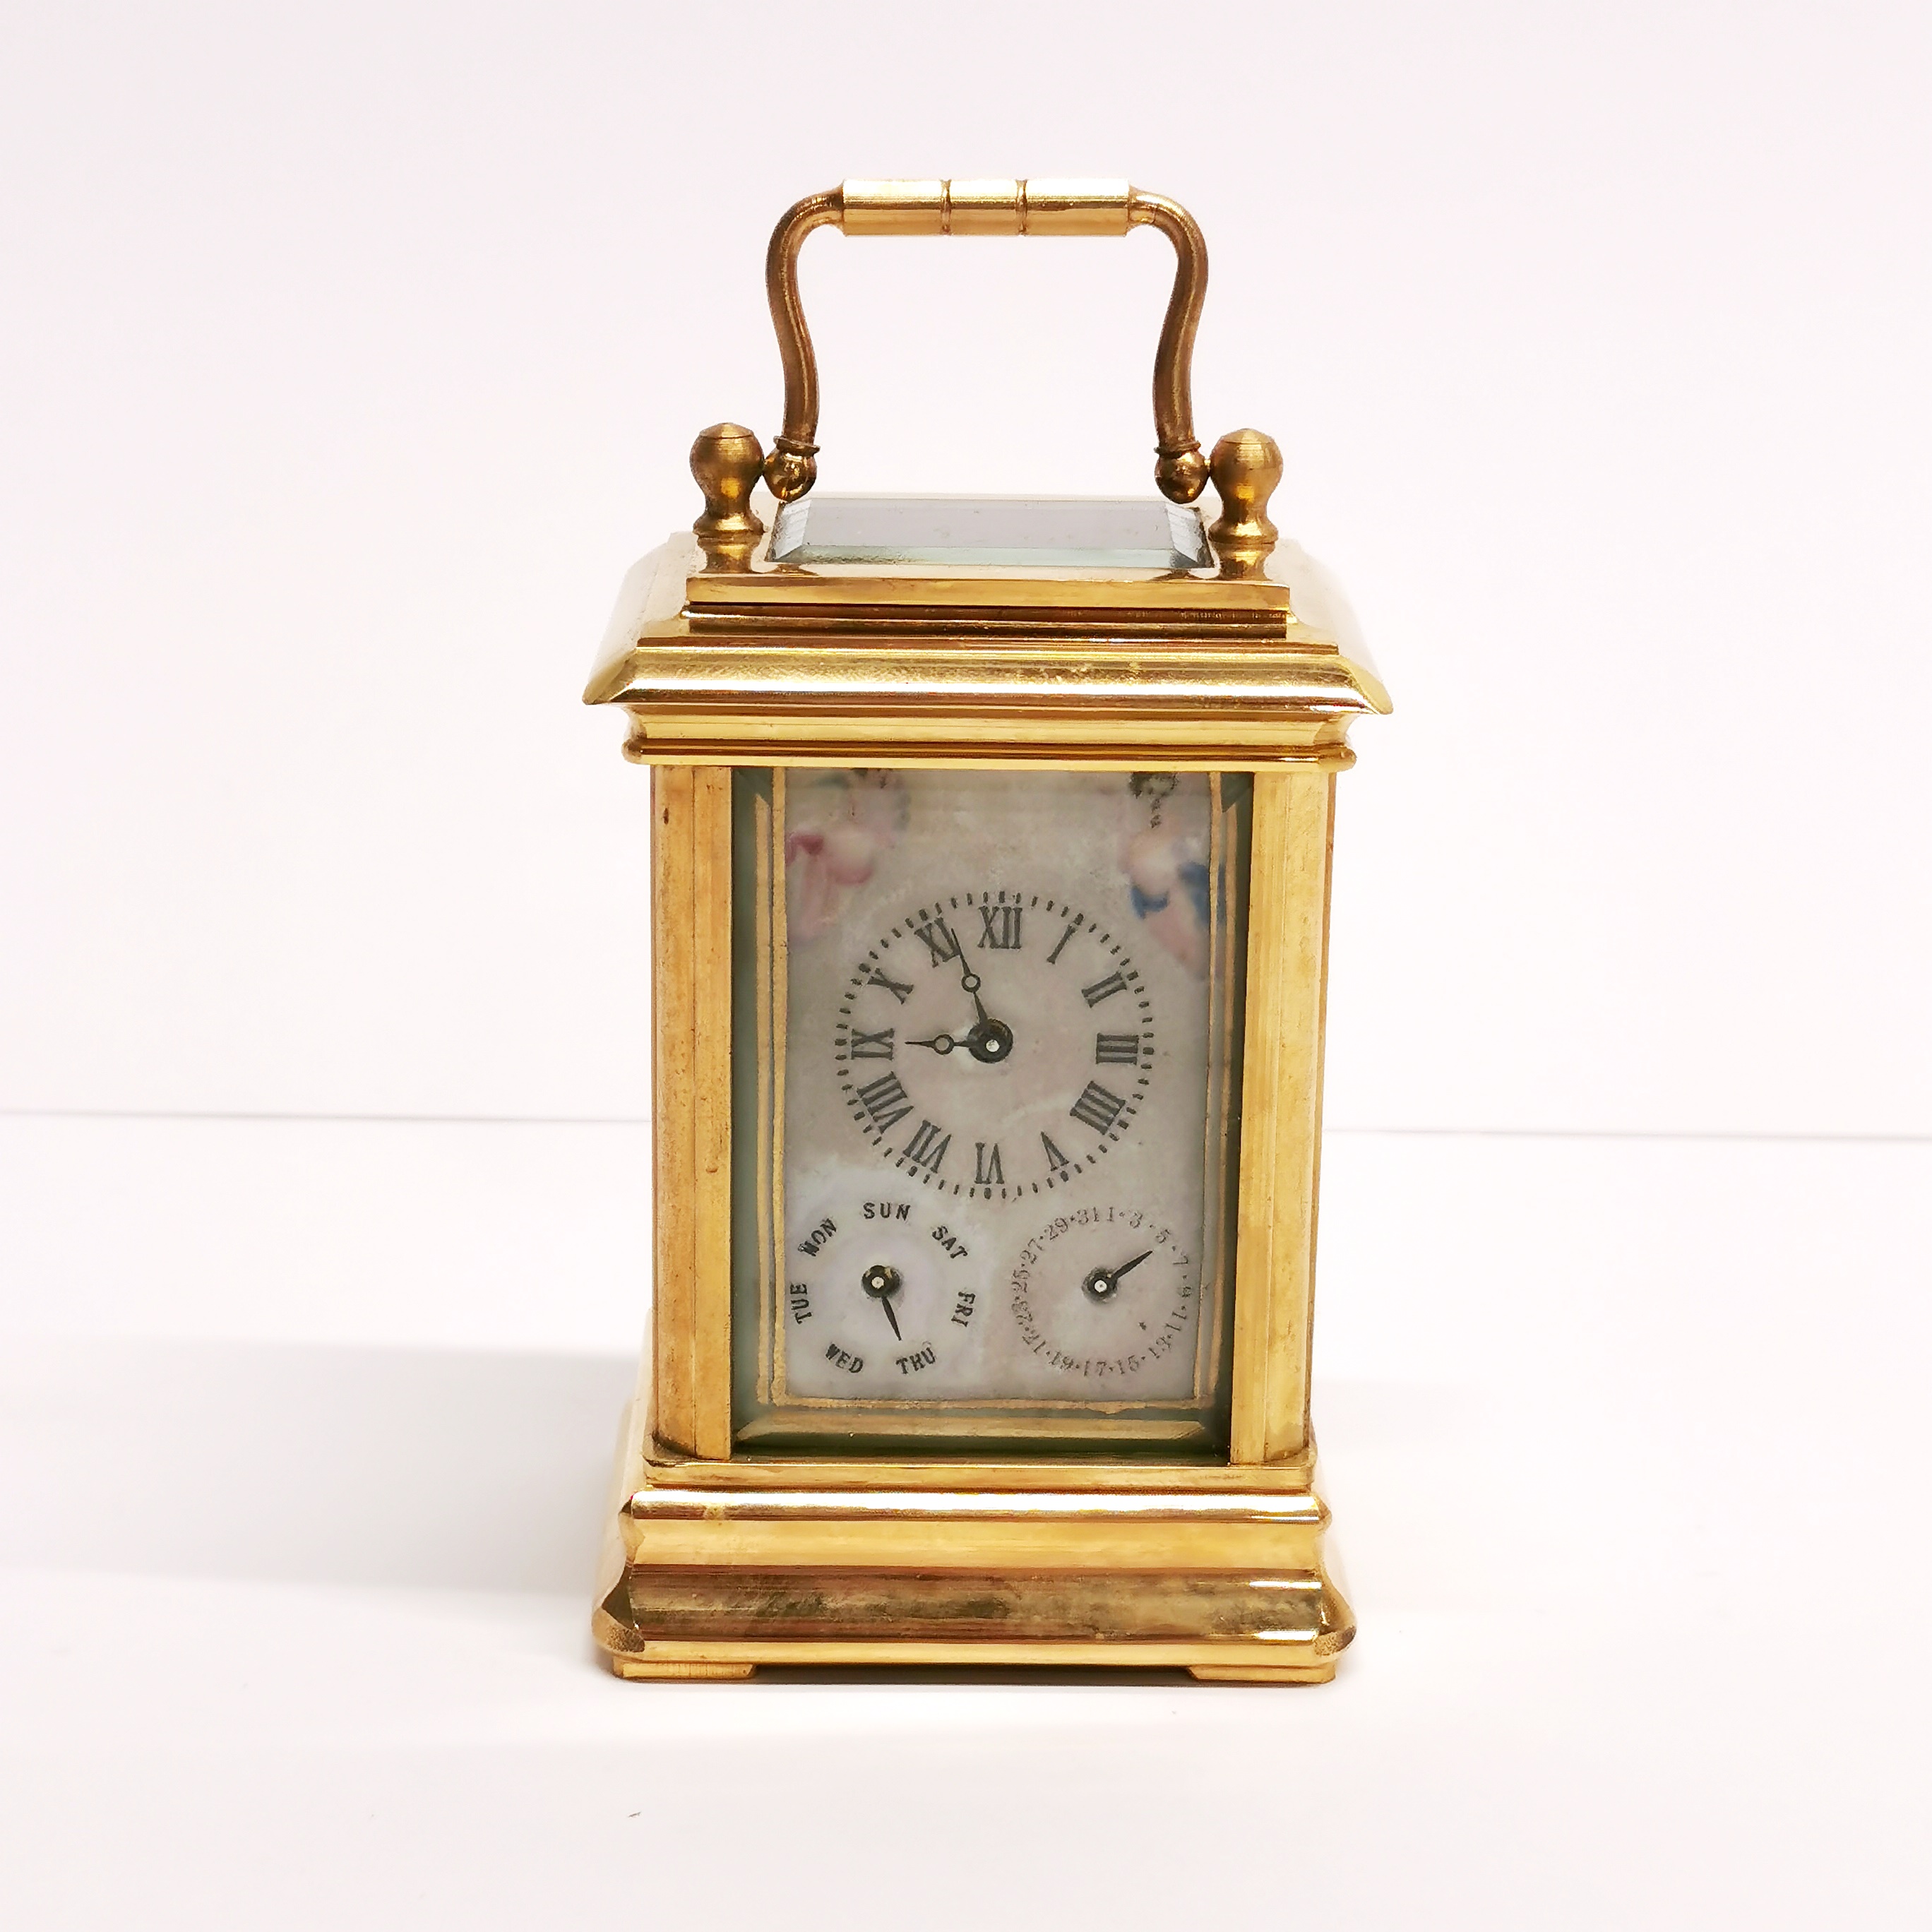 A small gilt brass carriage clock with porcelain panels, H. 10cm.